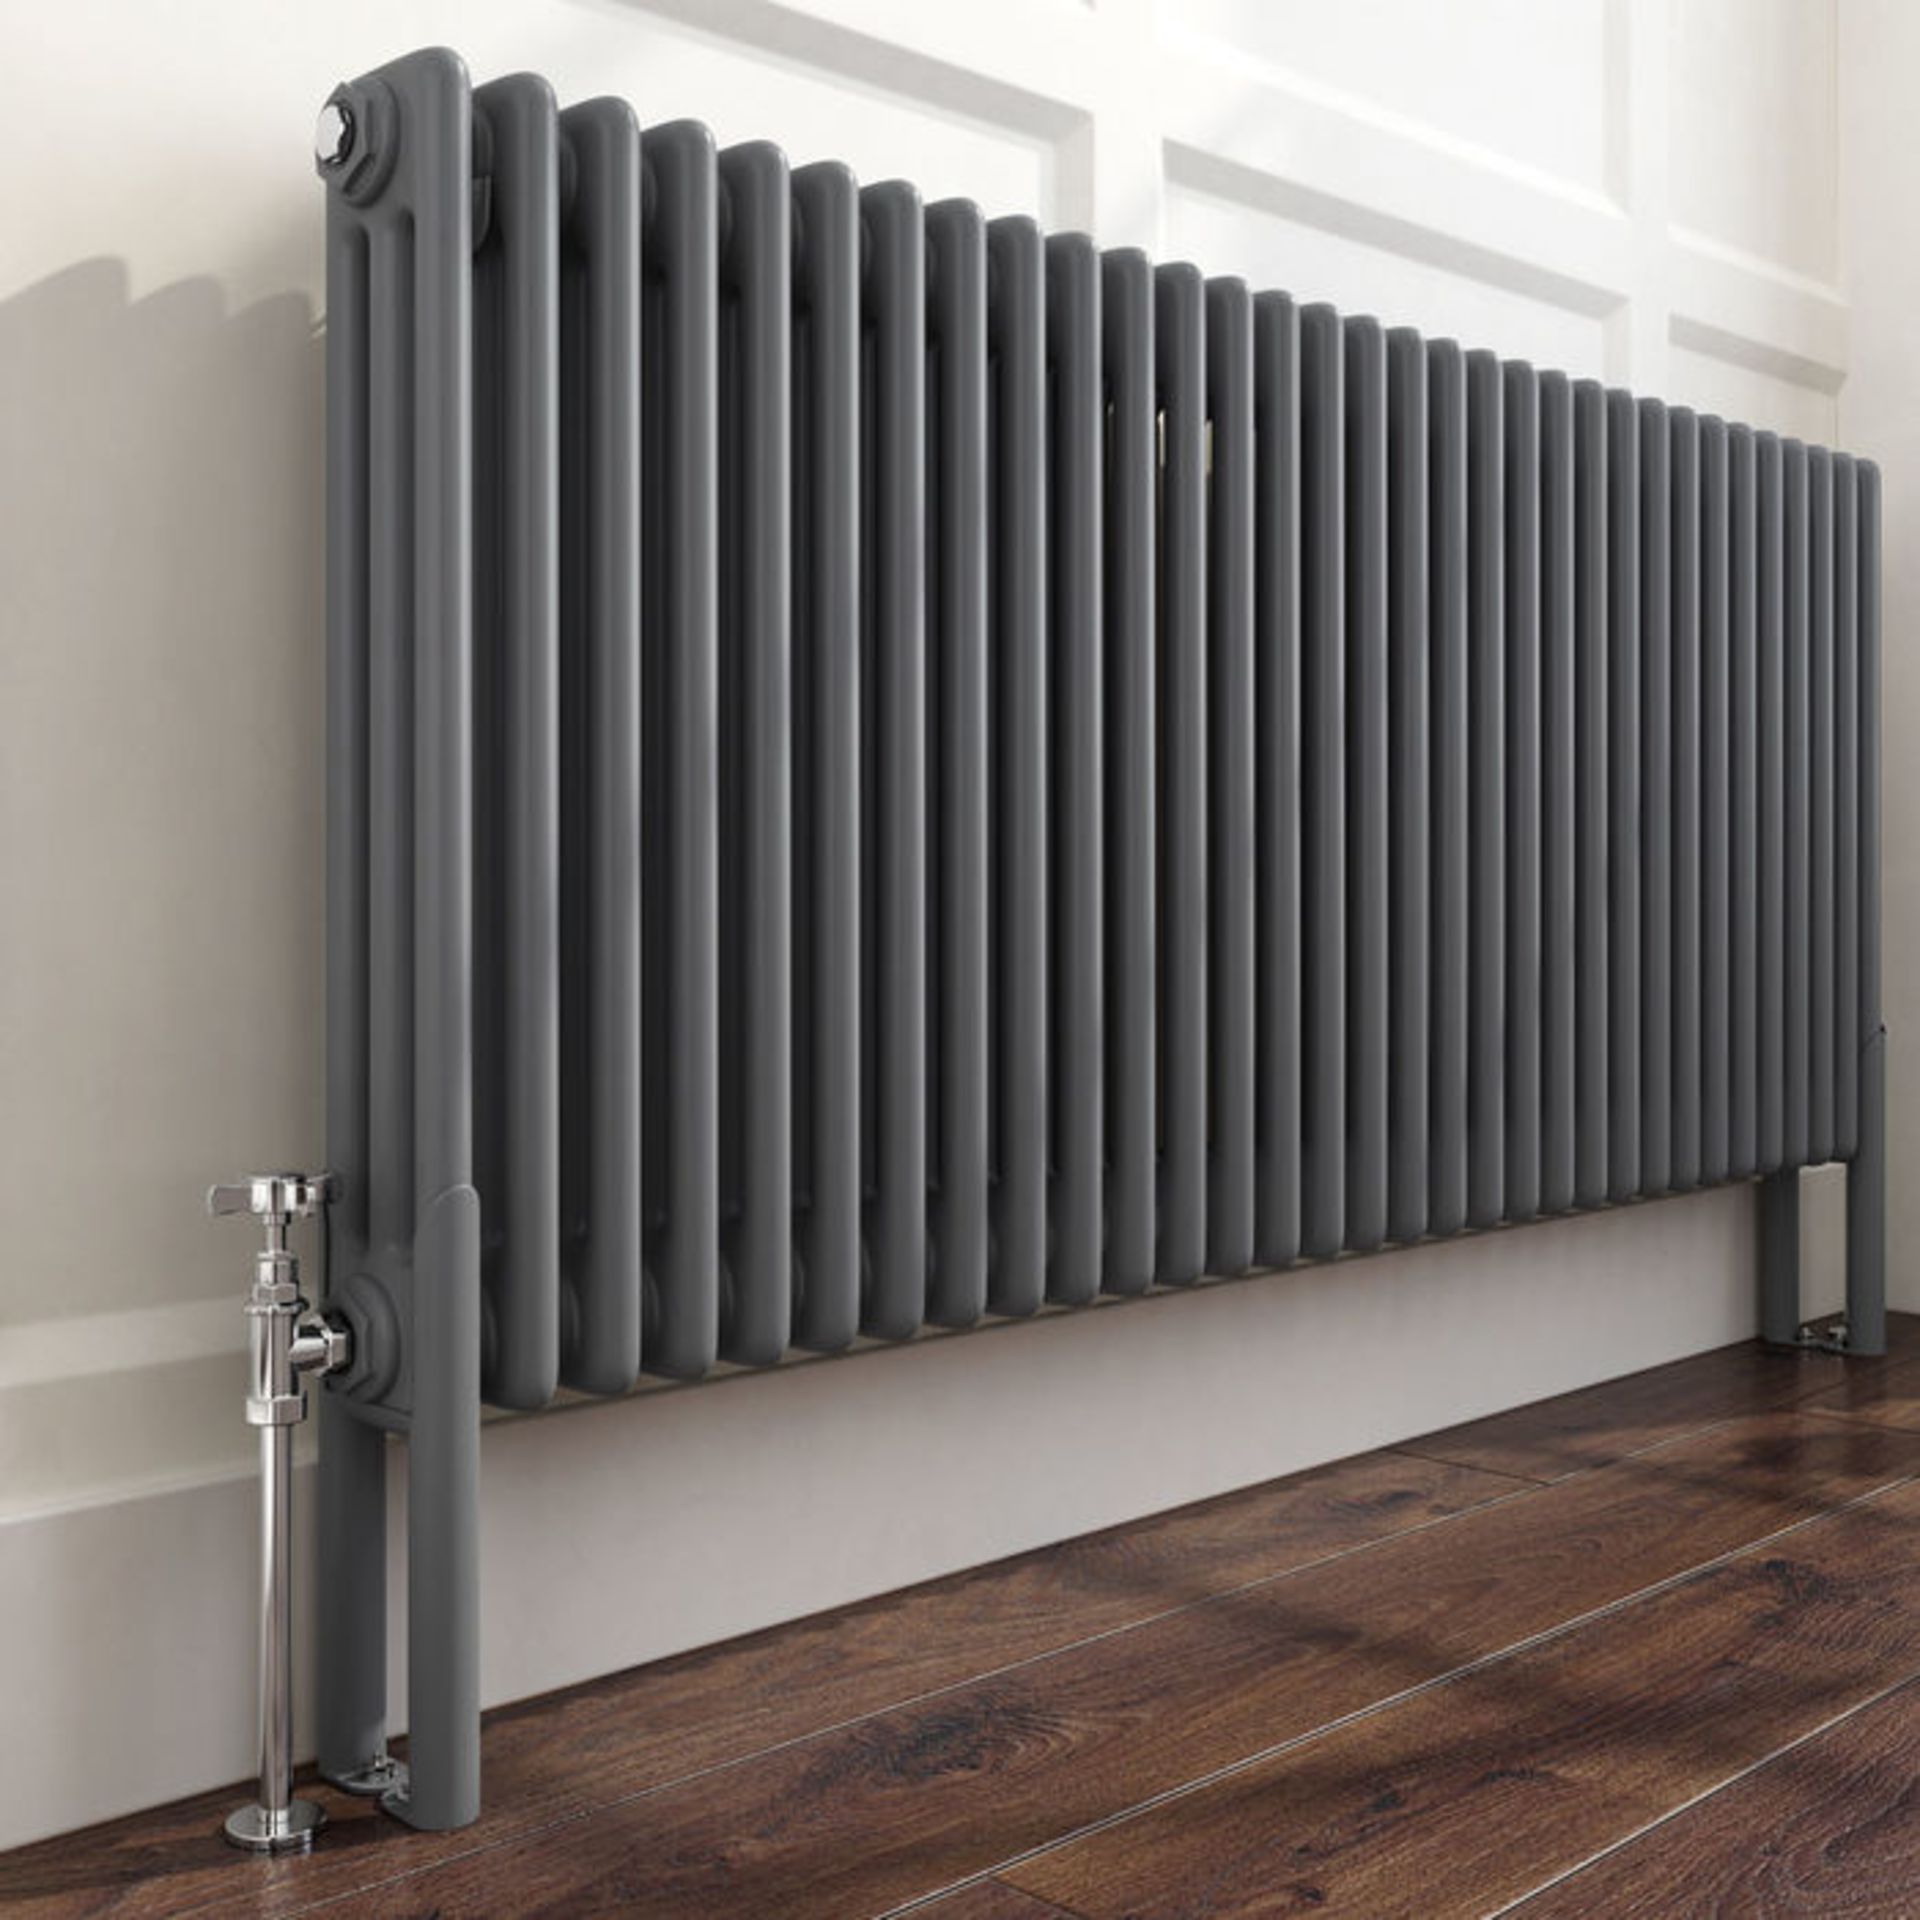 (S143) 300x102 - Wall Mounting Feet For 3 Bar Radiators - Anthracite Can be used to floor mount - Image 2 of 3